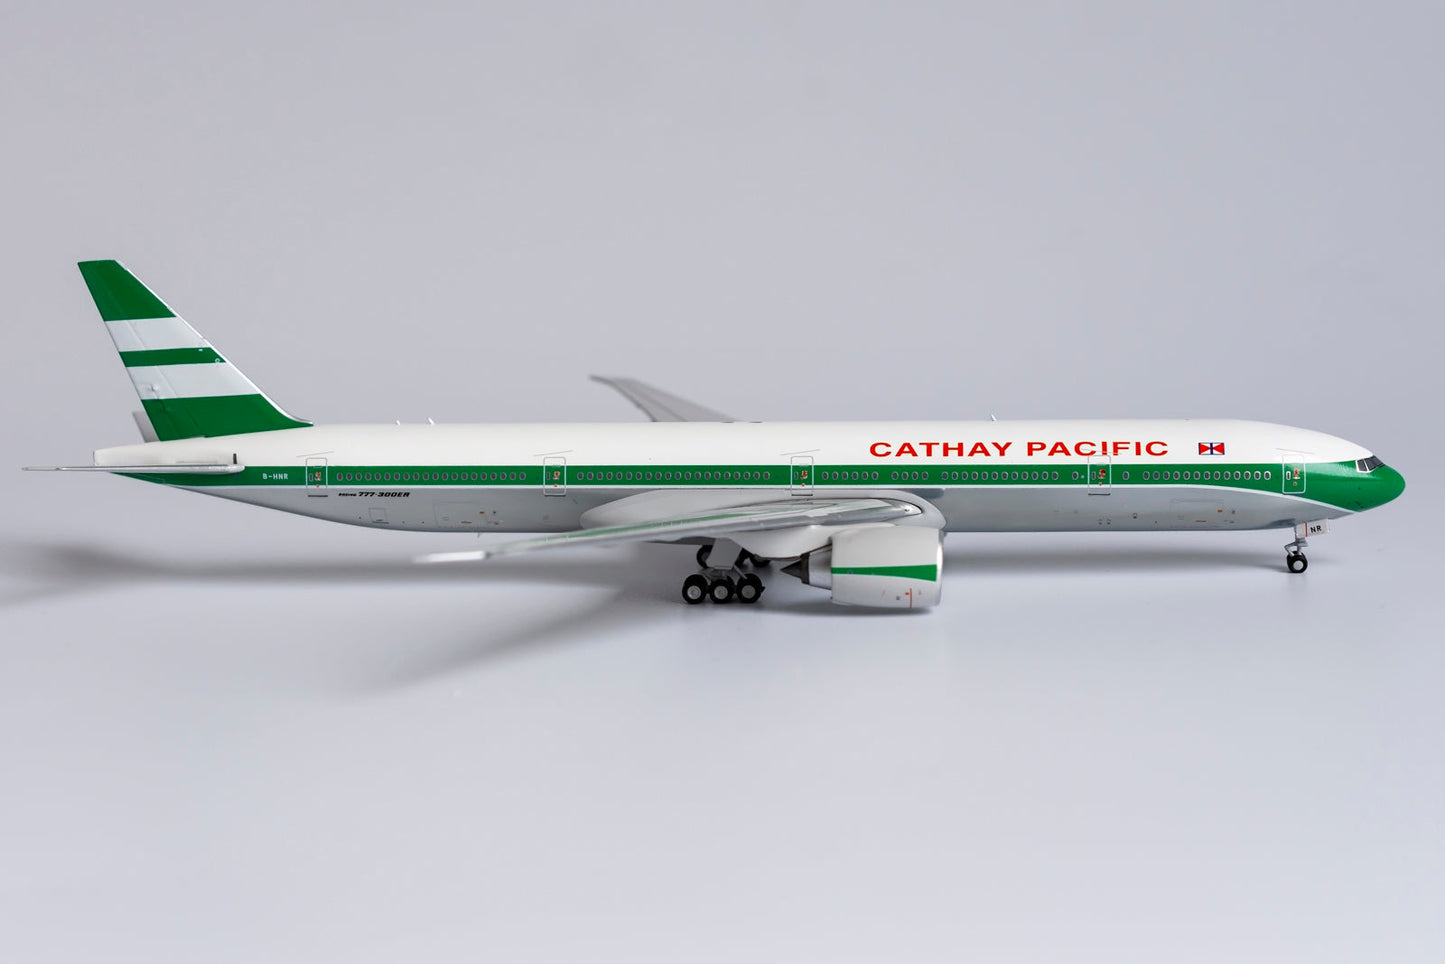 1/400 Cathay Pacific B 777-300ER "Fantasy Retro Livery" NG Models 73001s/d2 *Defective model*